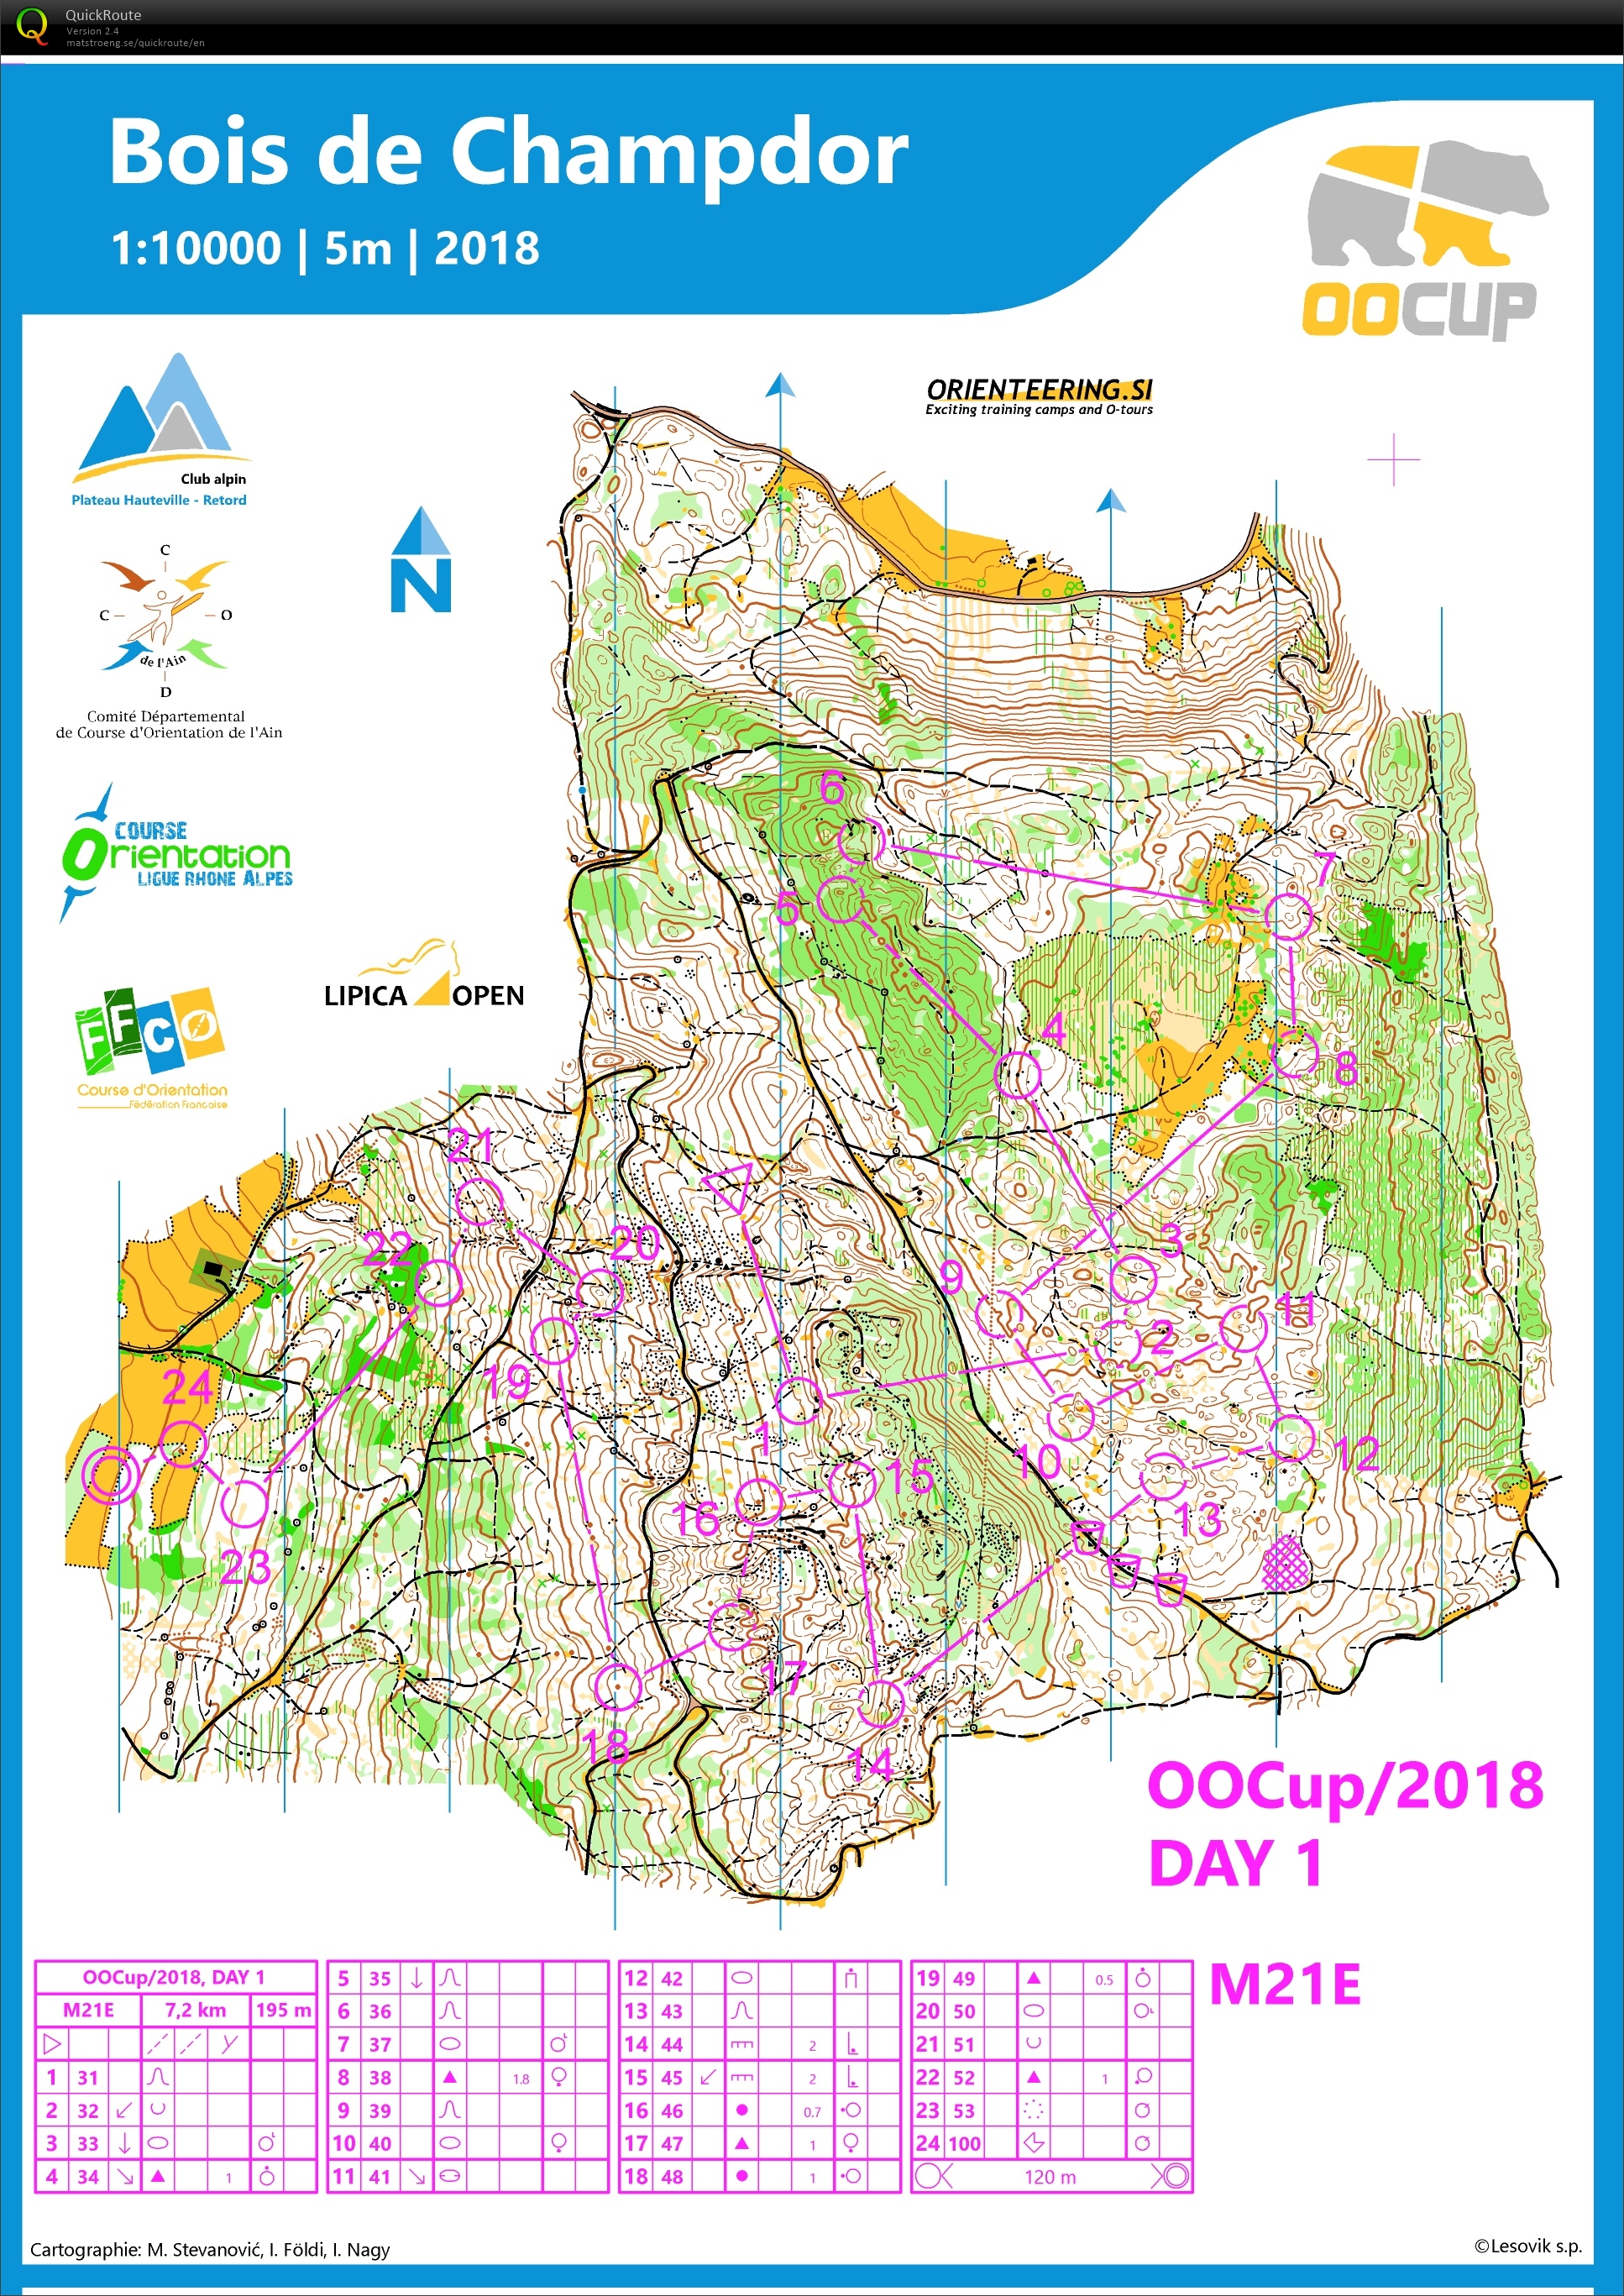 OOcup - day1 (25/07/2018)